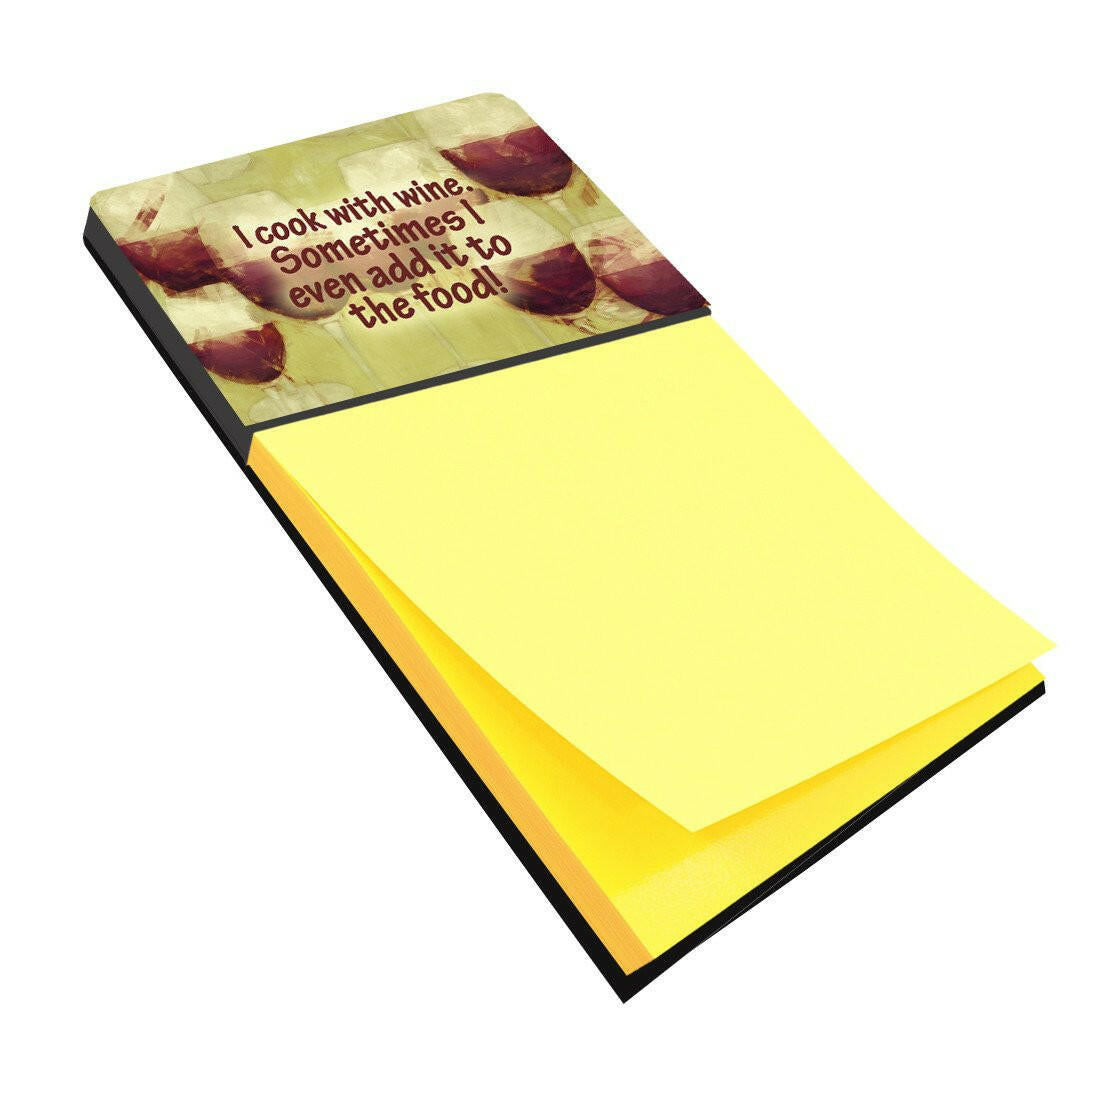 I cook with wine Refiillable Sticky Note Holder or Postit Note Dispenser SB3069SN by Caroline's Treasures